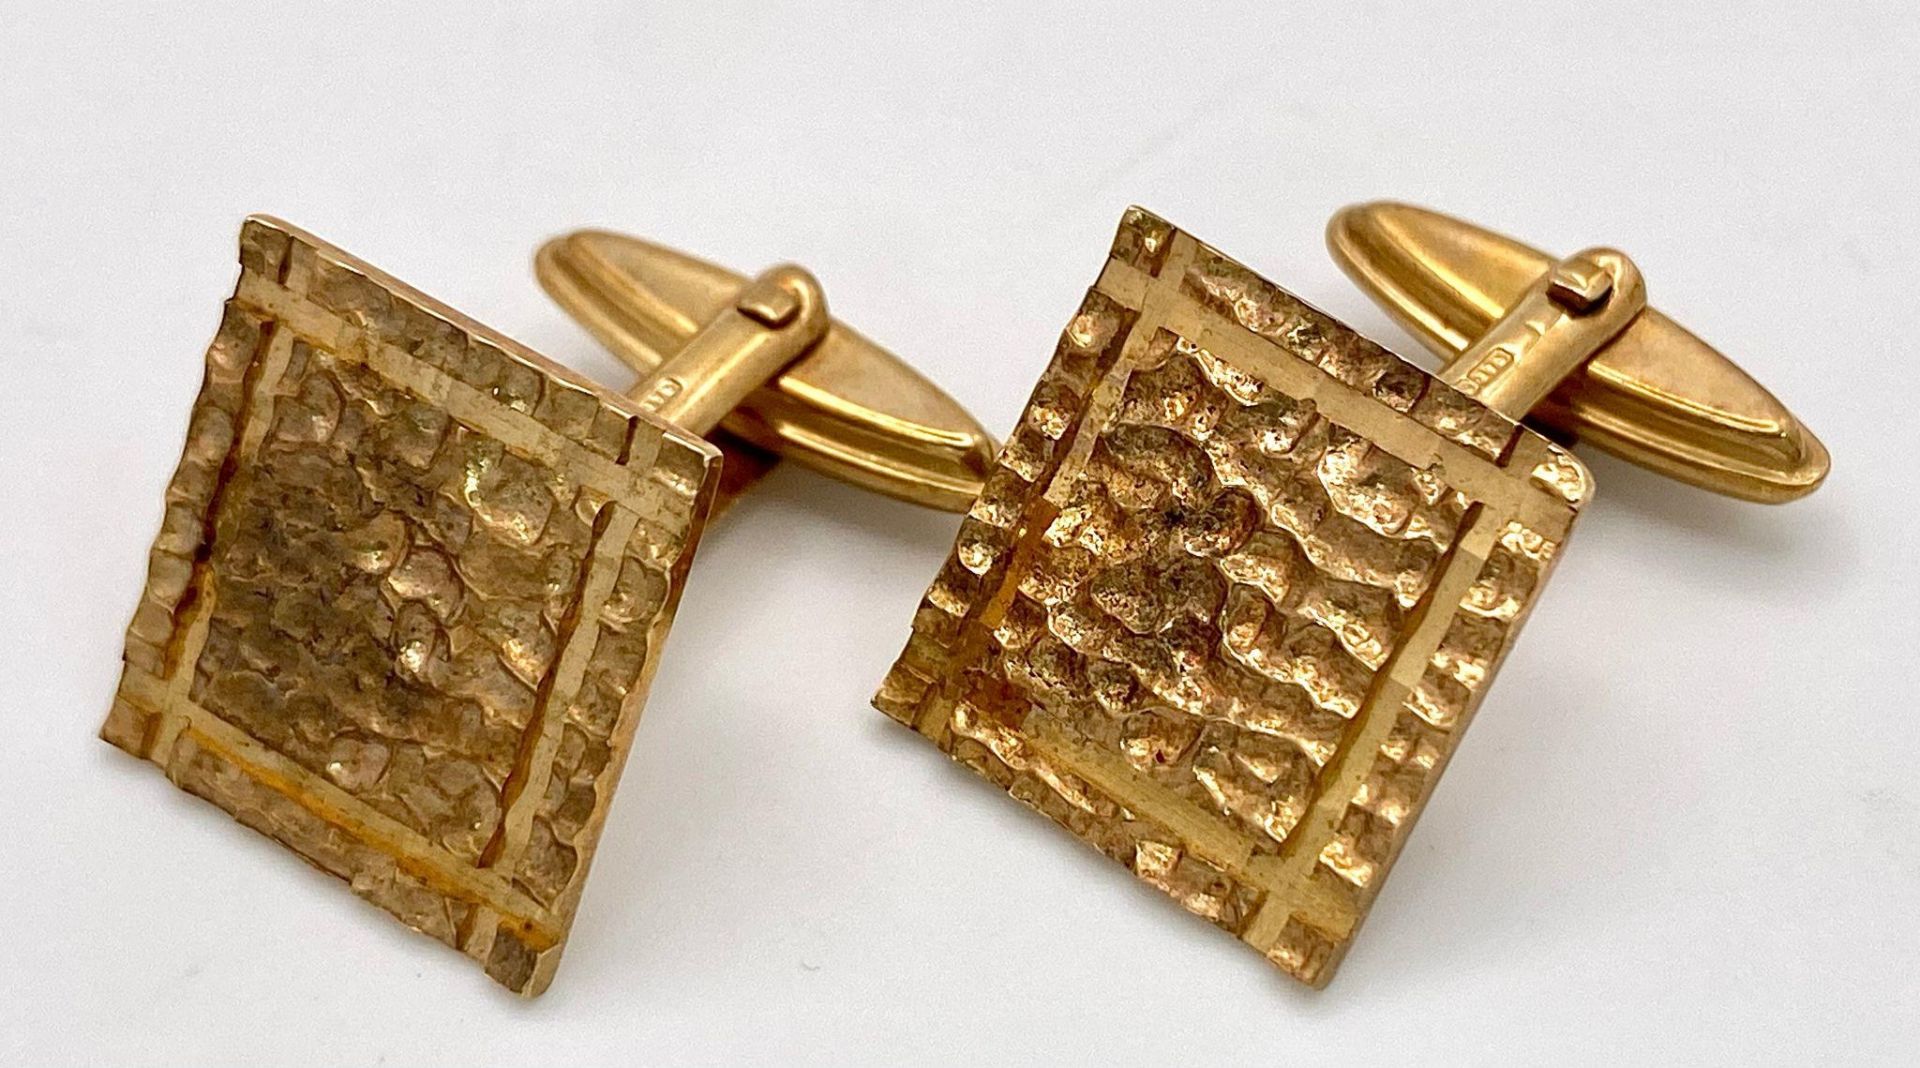 Two Vintage 9K Yellow Gold Gents Cufflinks. Nice, textured finish. 8.9g total weight.